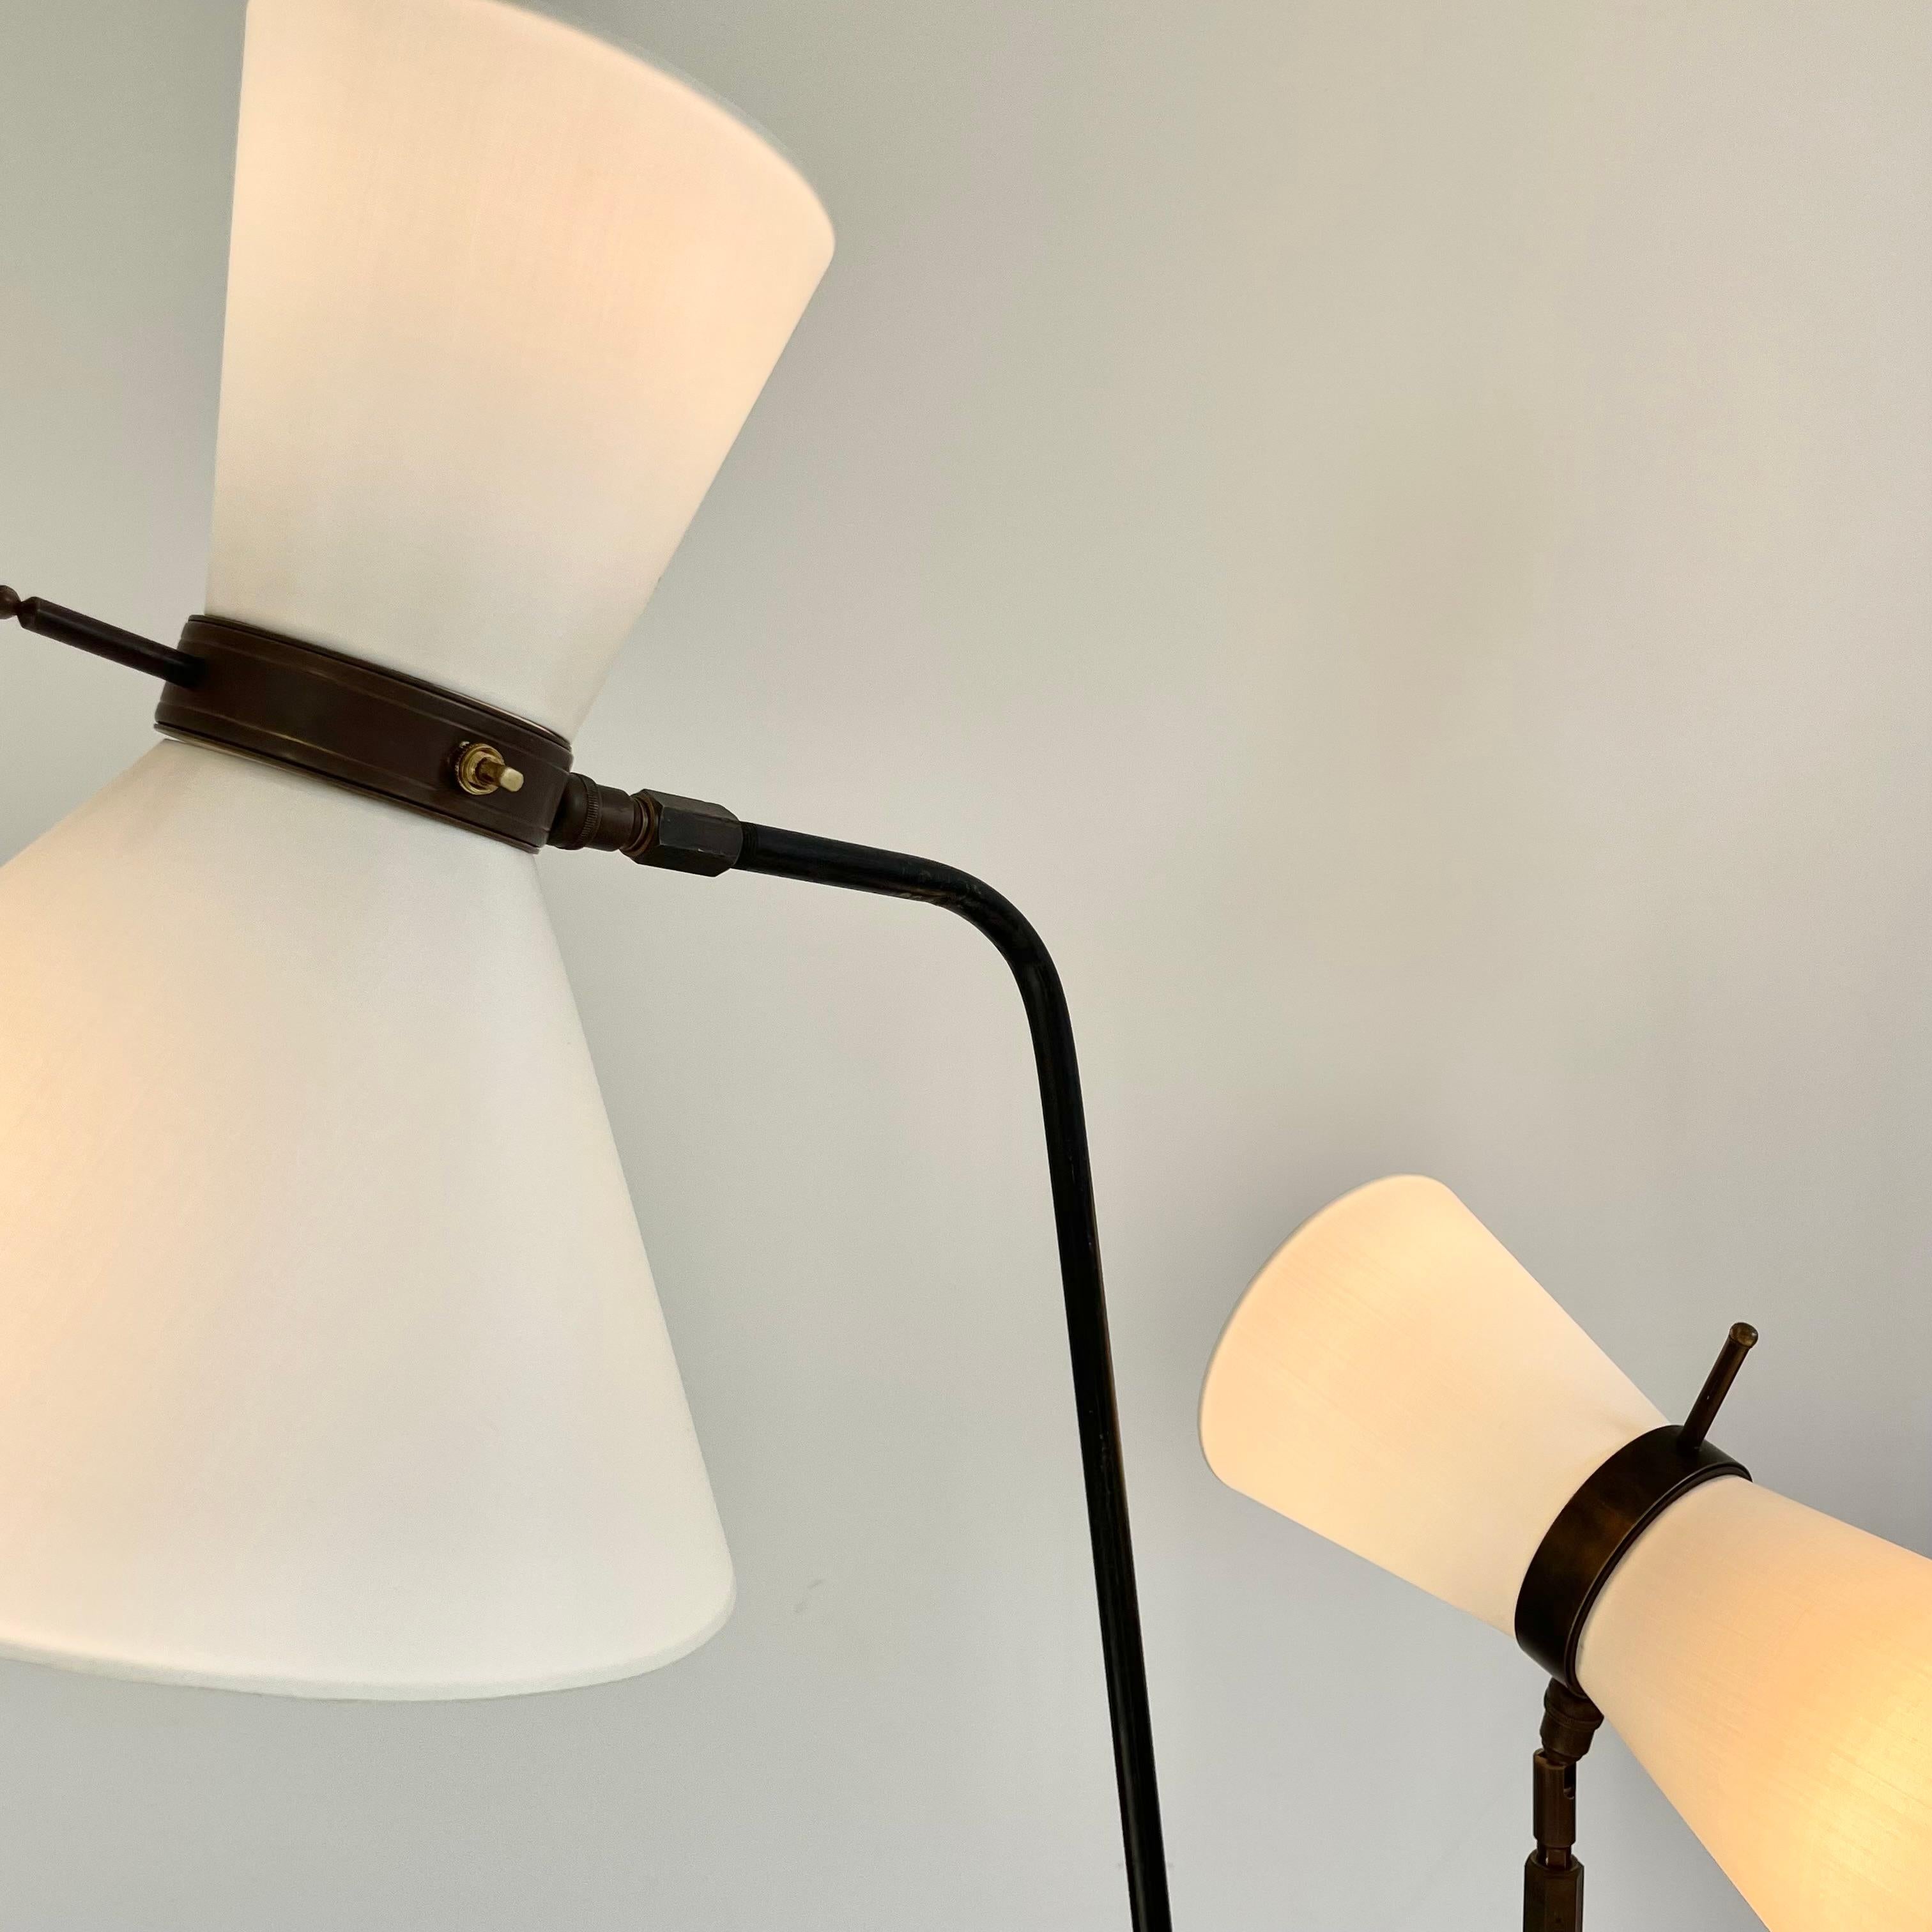 Double Headed Articulating Floor Lamp, 1950s France For Sale 4